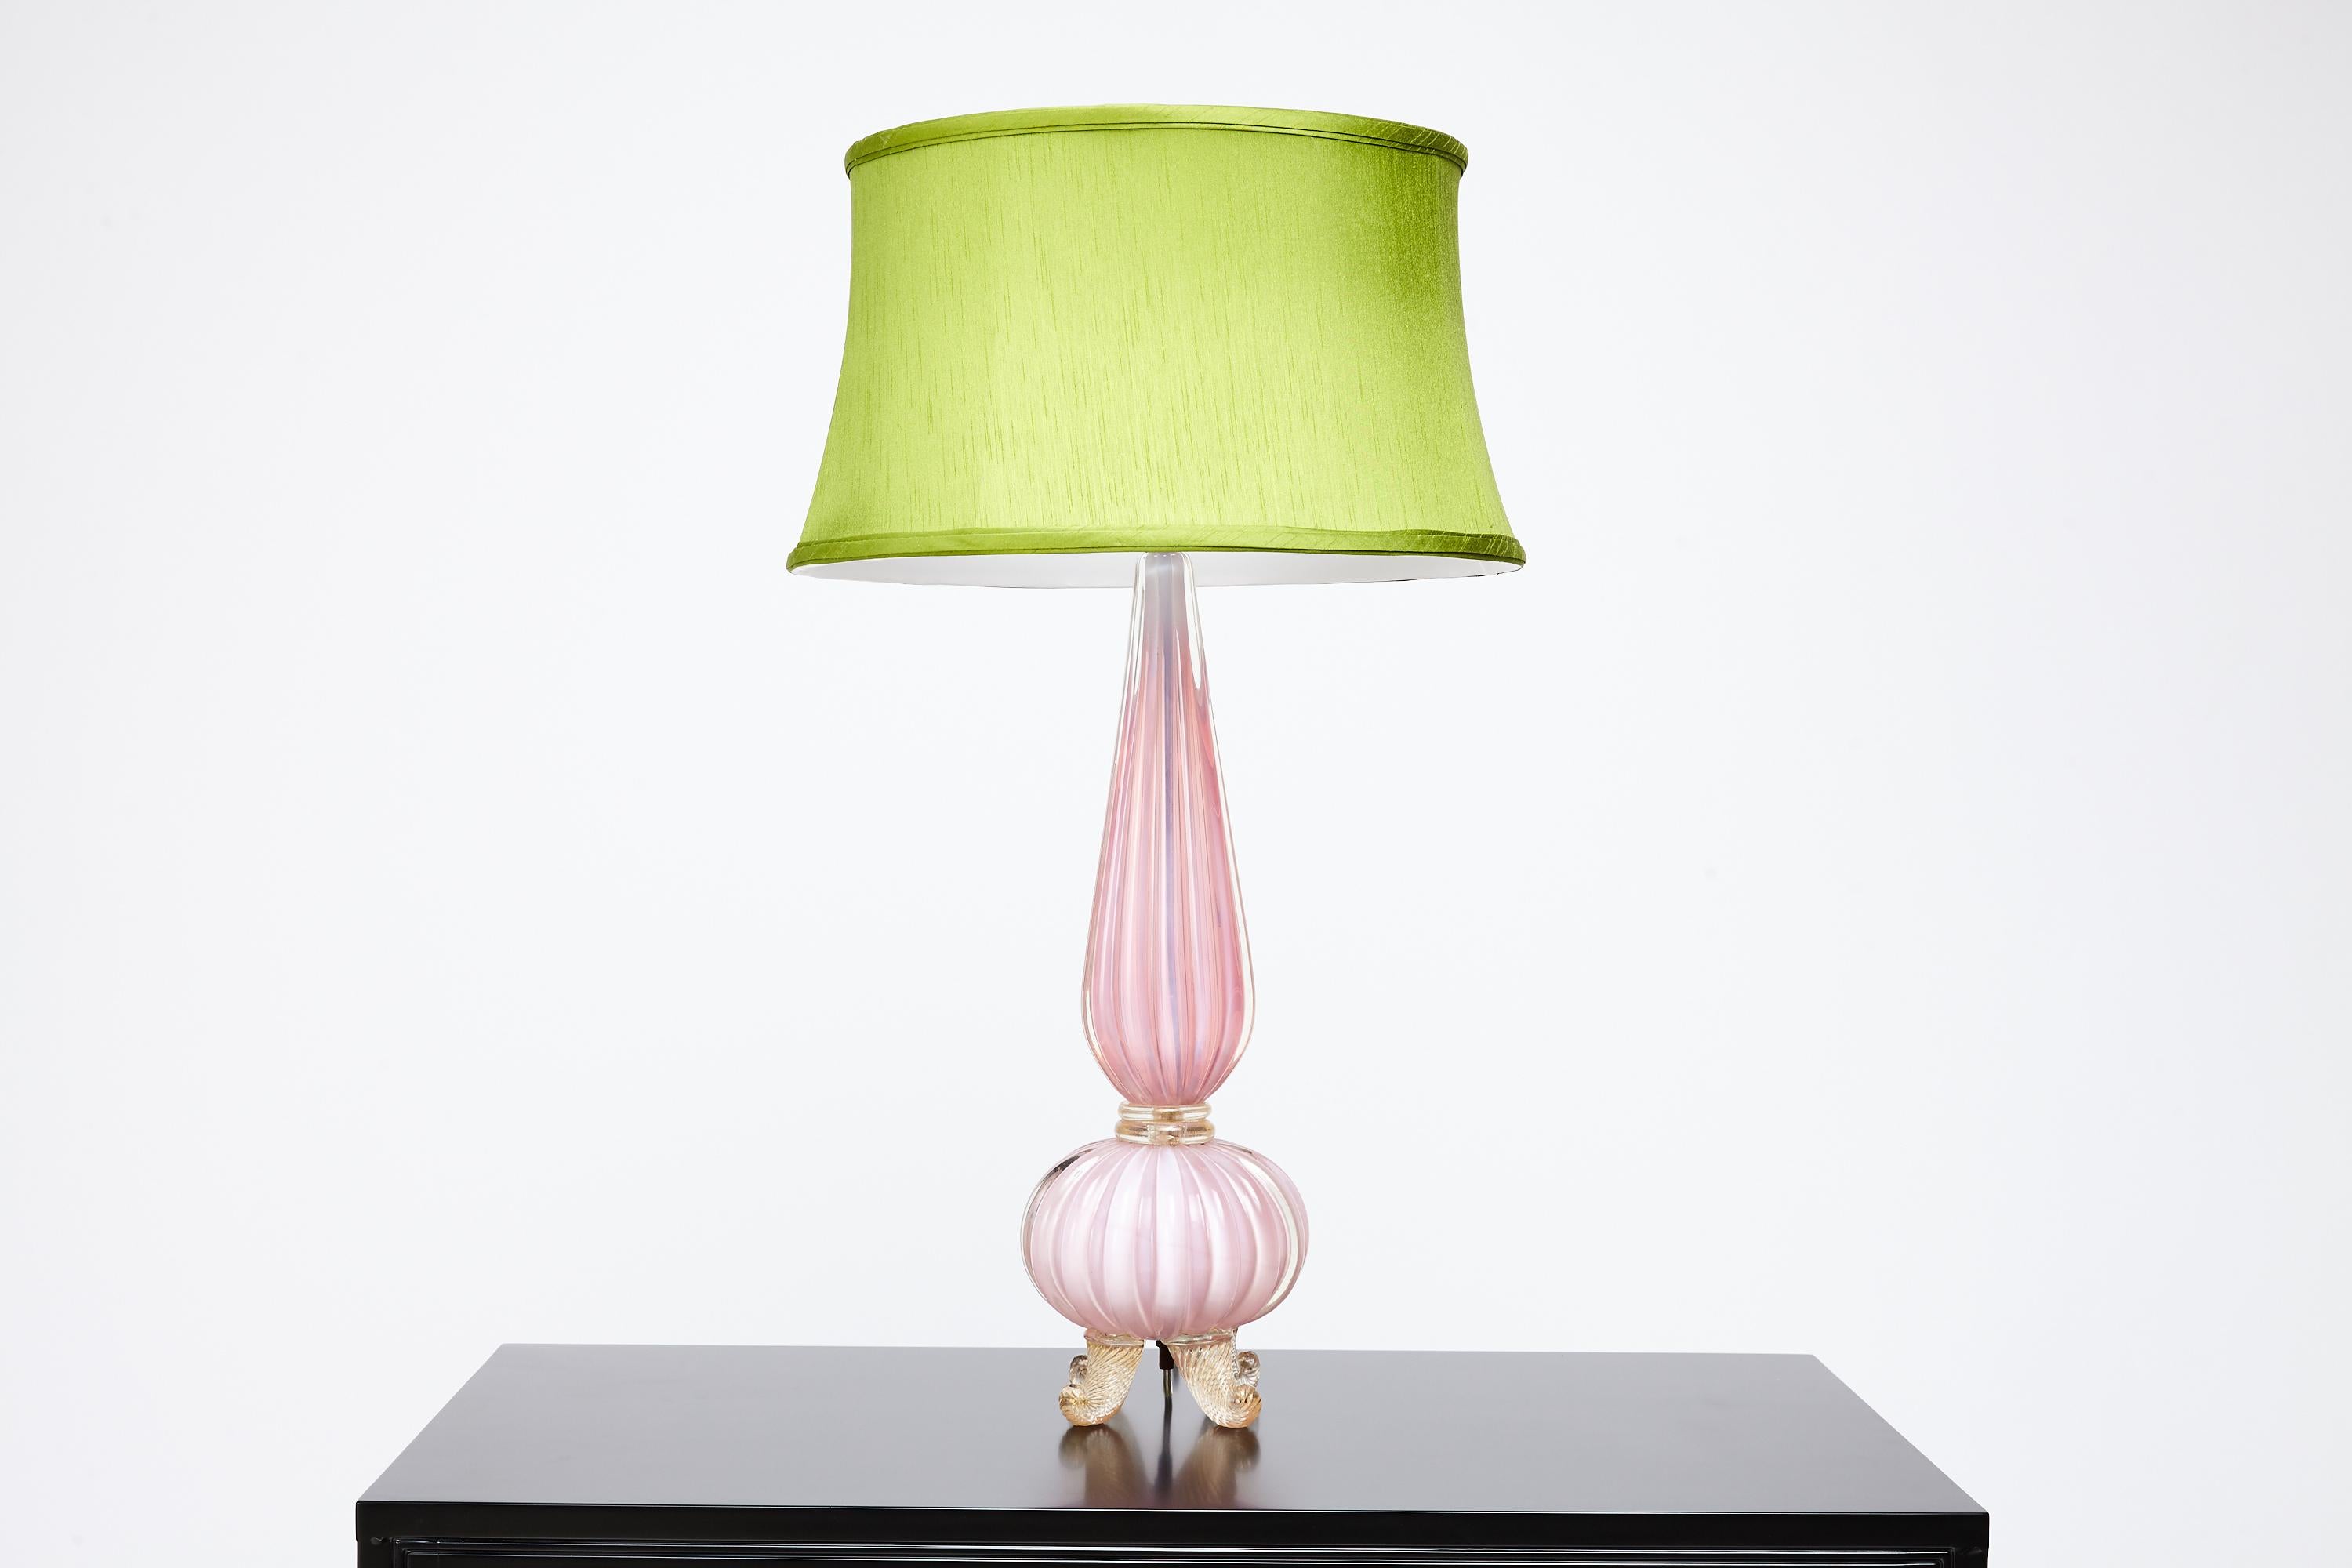 Fabulous pink Murano lamp by Barovier, late 1950s or early 1960s, gold curlee glass feet. Very stylish and chic. Want to see more beautiful things? Scroll down below and click 